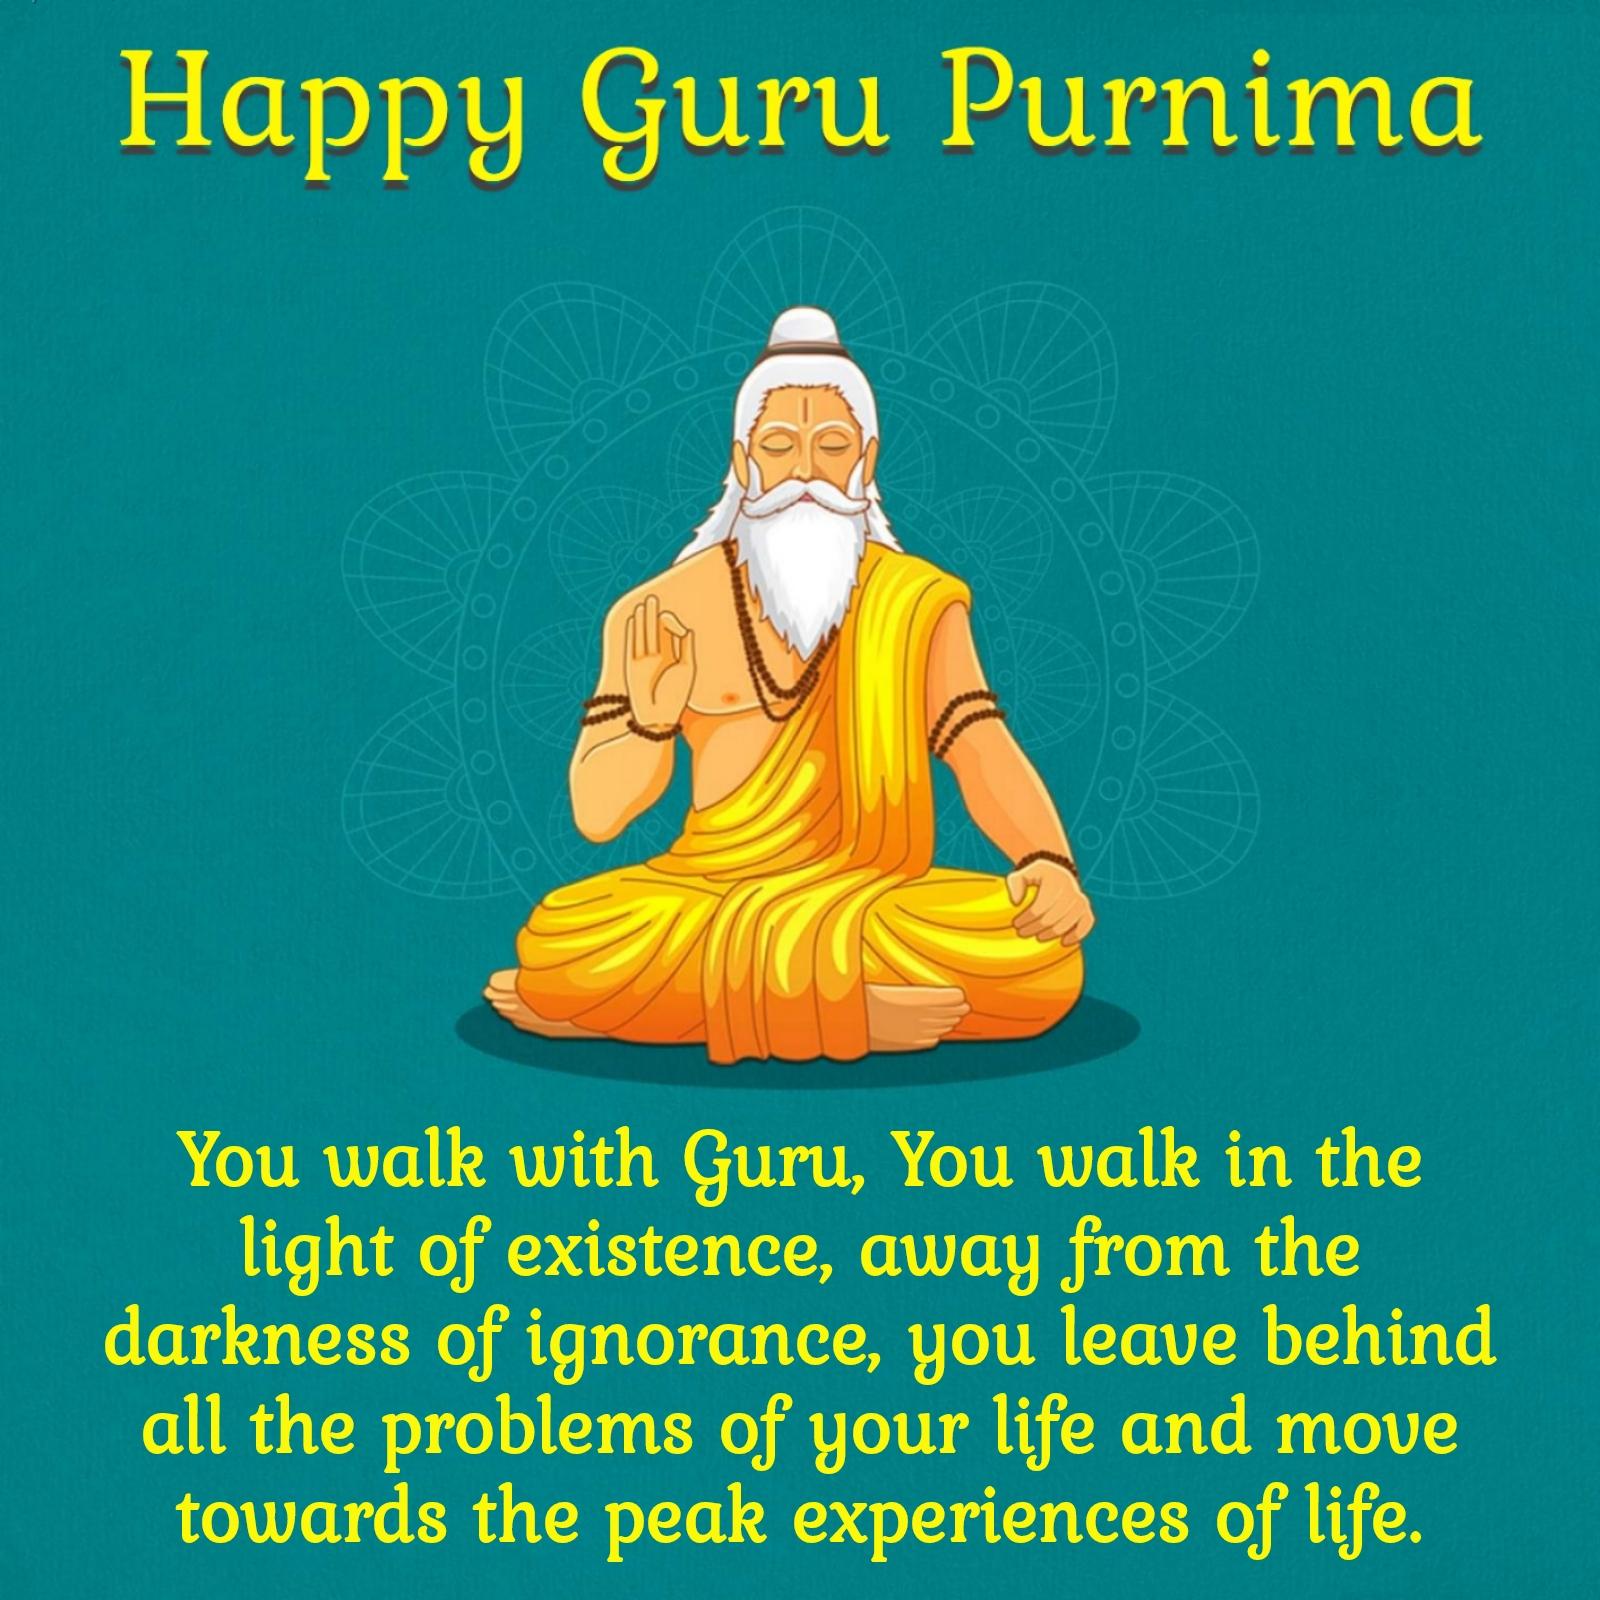 You walk with Guru You walk in the light of existence